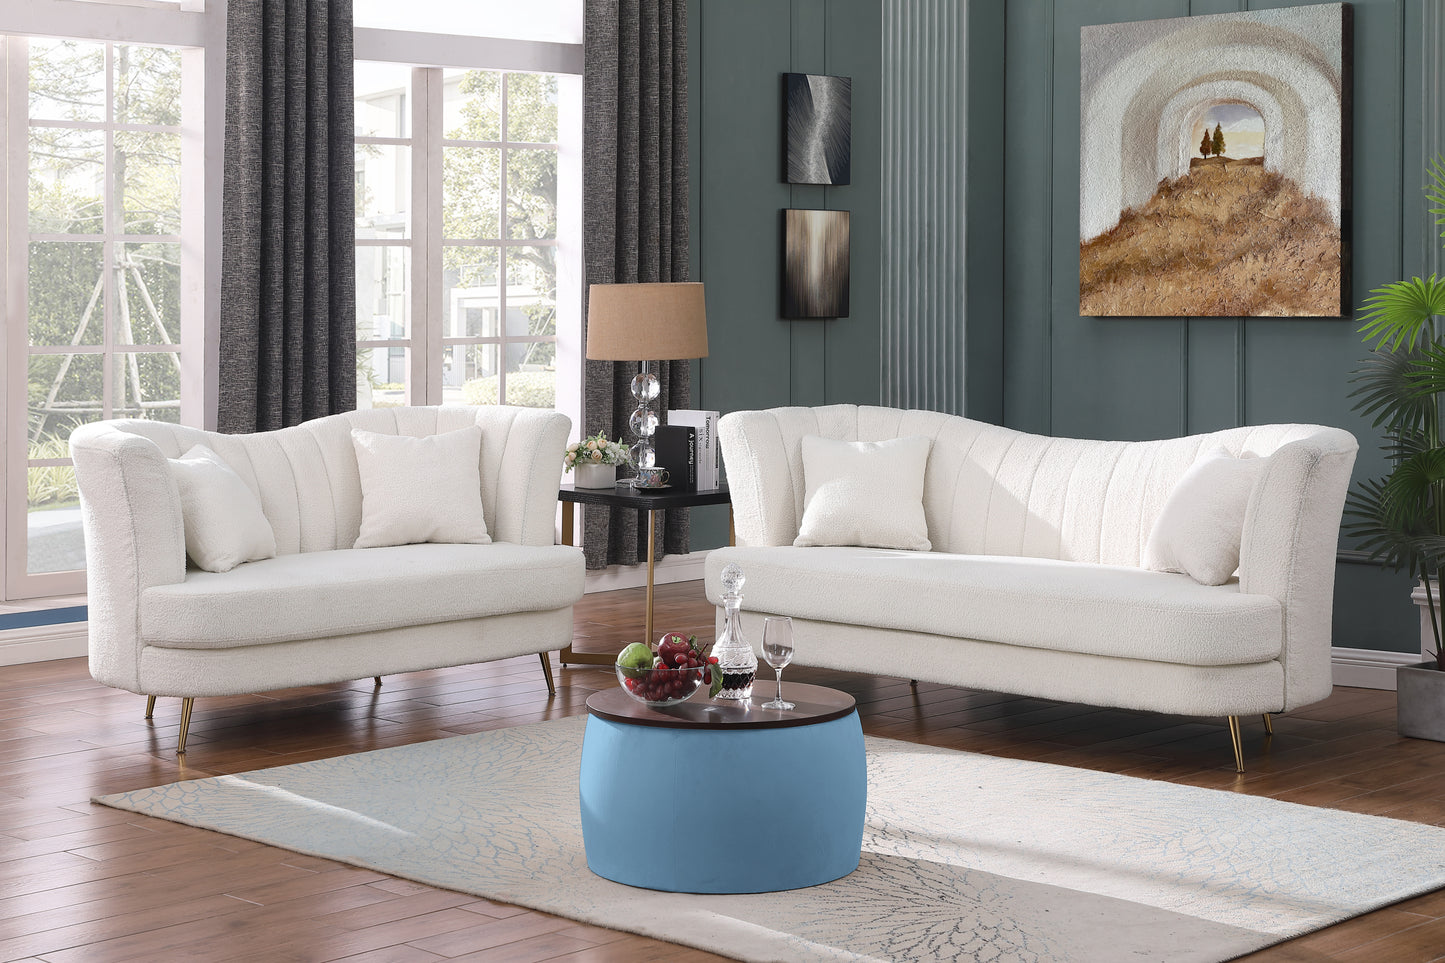 Round Ottoman Set with Storage and Reversible Lid - Versatile Furniture Piece for Home